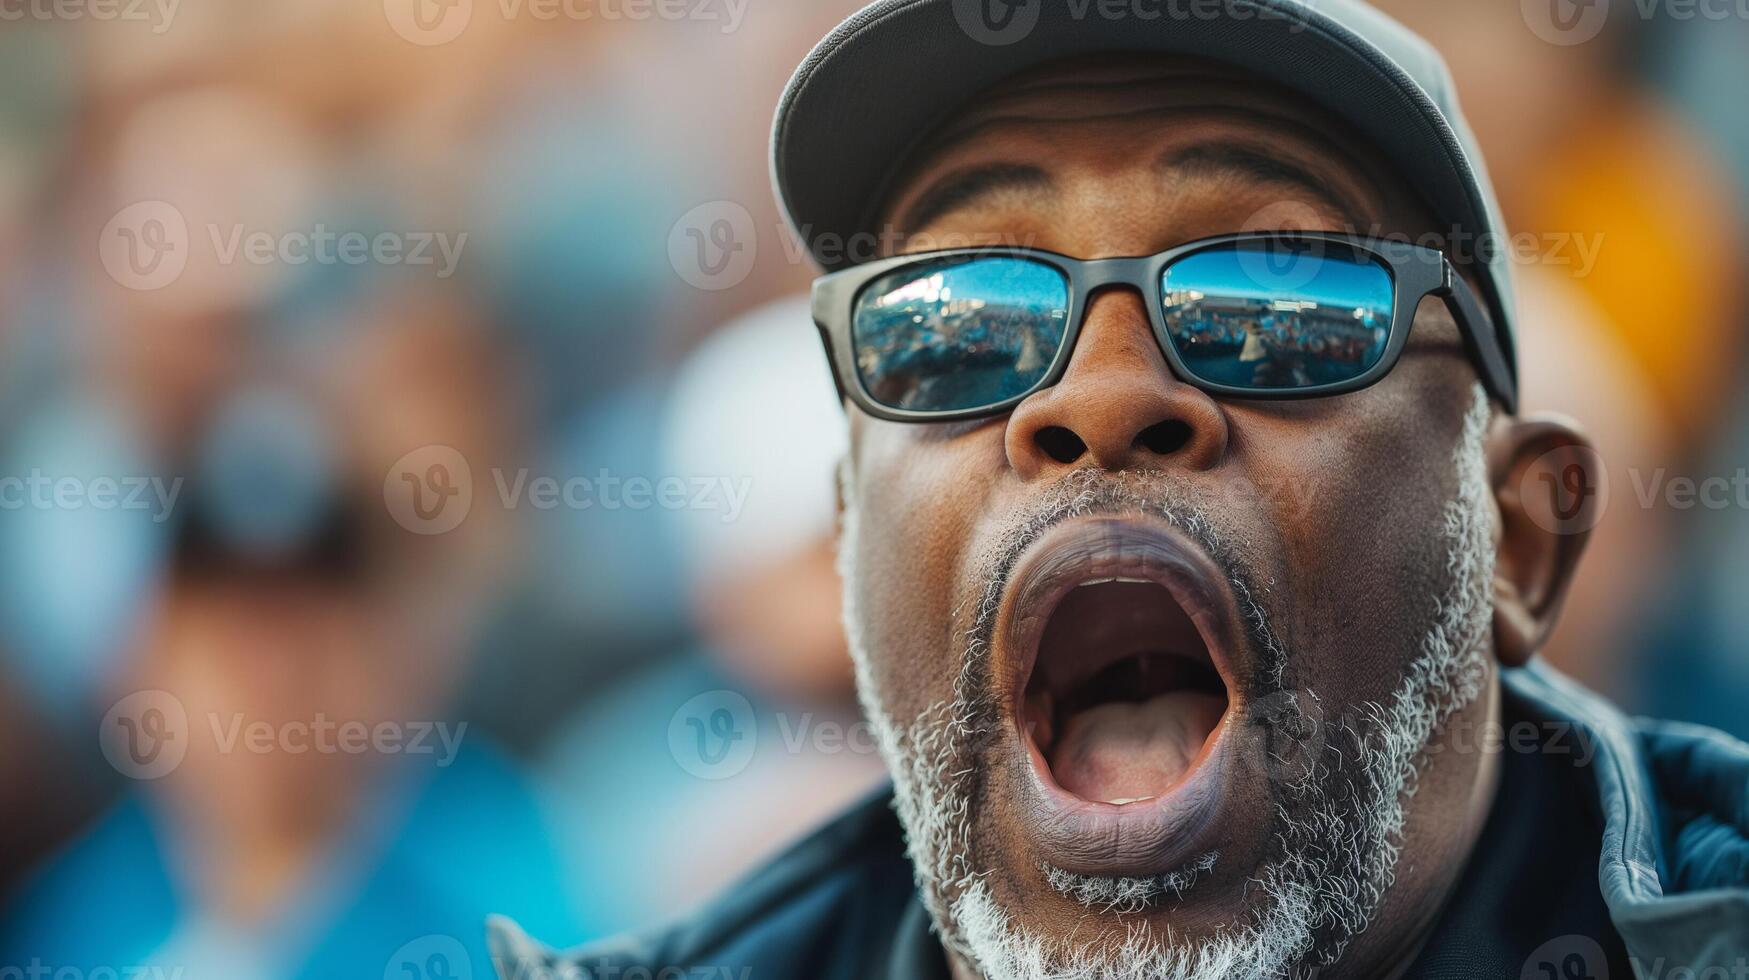 African American man in sunglasses shouting passionately at a public event, embodying concepts of protest, activism, or sports fandom photo